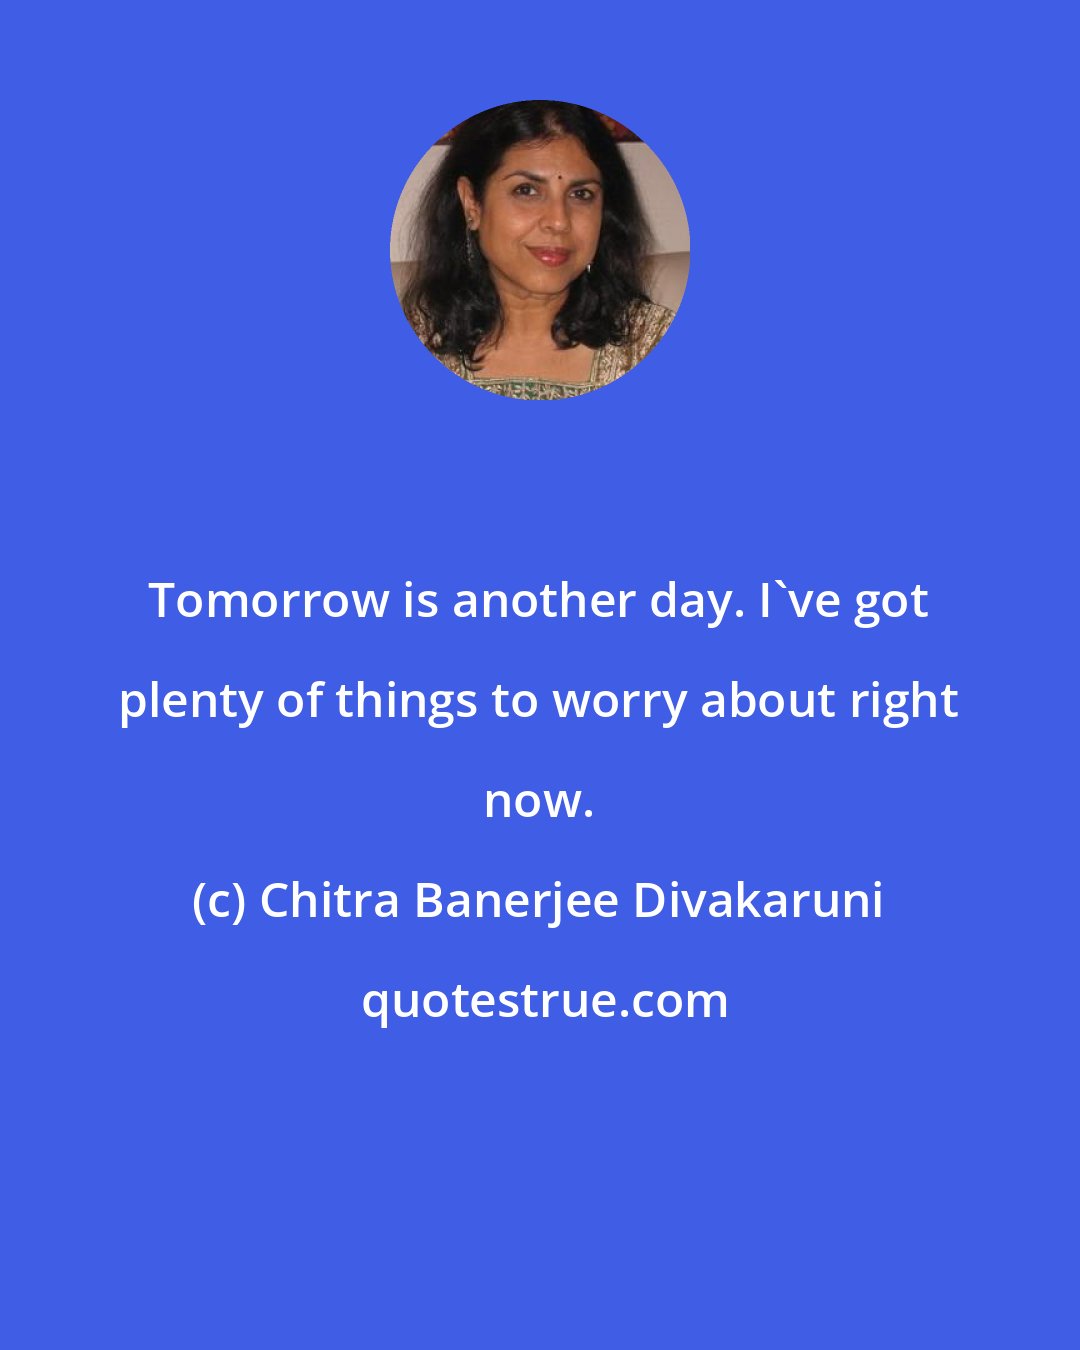 Chitra Banerjee Divakaruni: Tomorrow is another day. I've got plenty of things to worry about right now.